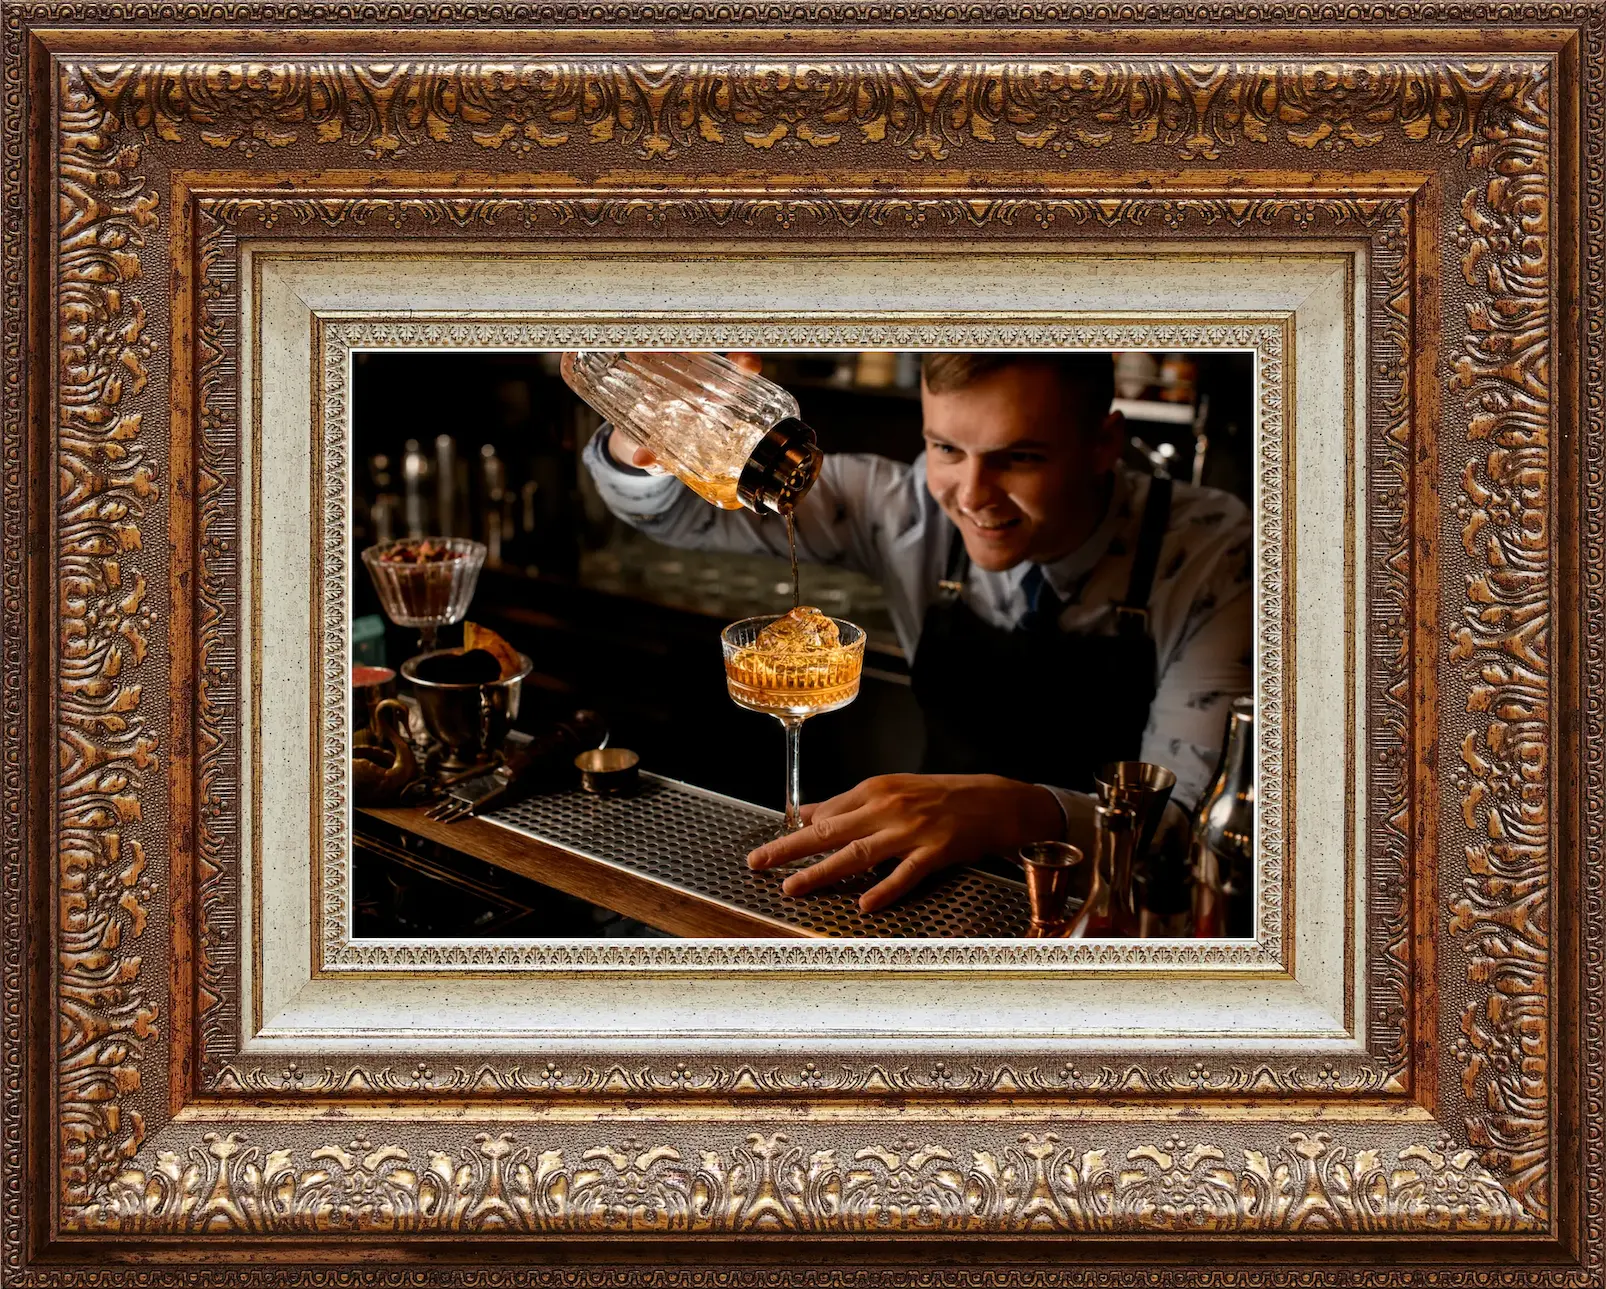 Image of bartender hired for an event making a cocktail